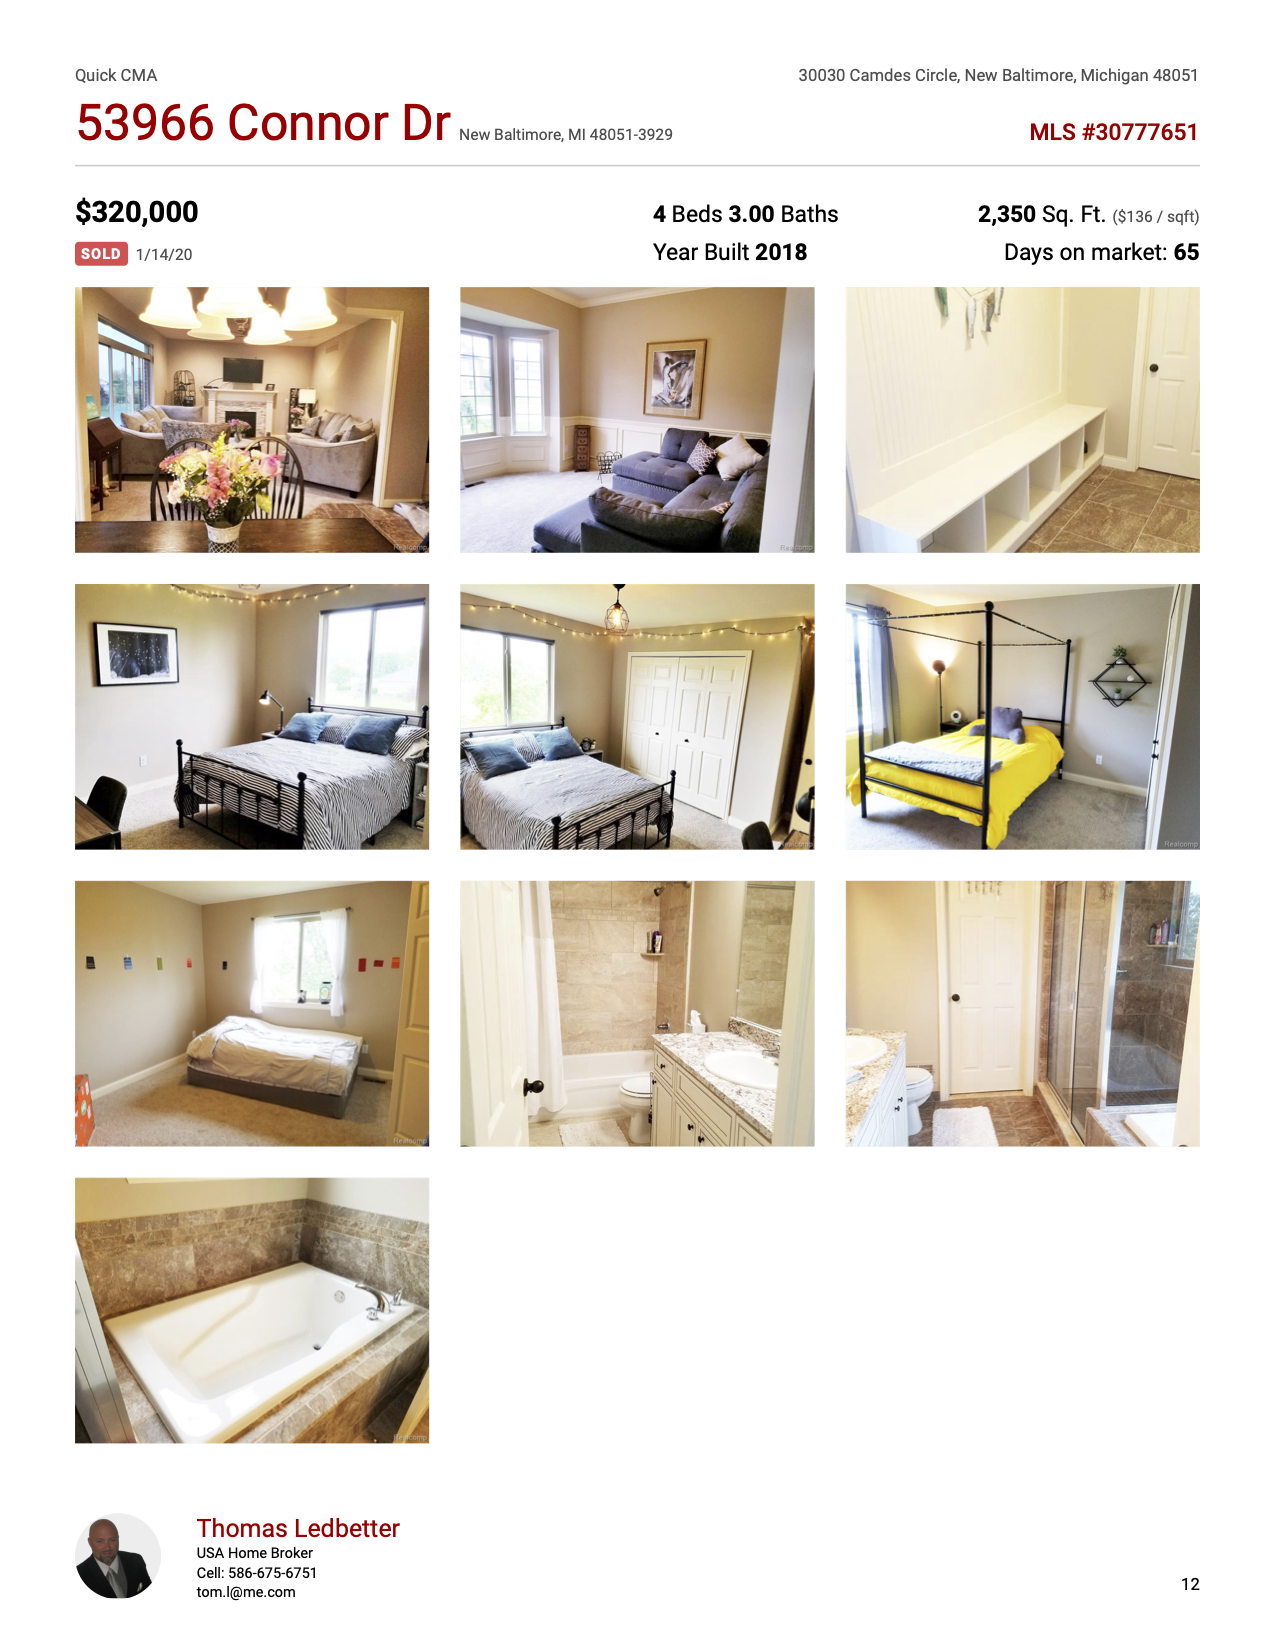 Multiple pictures to visual compare the condition of the property